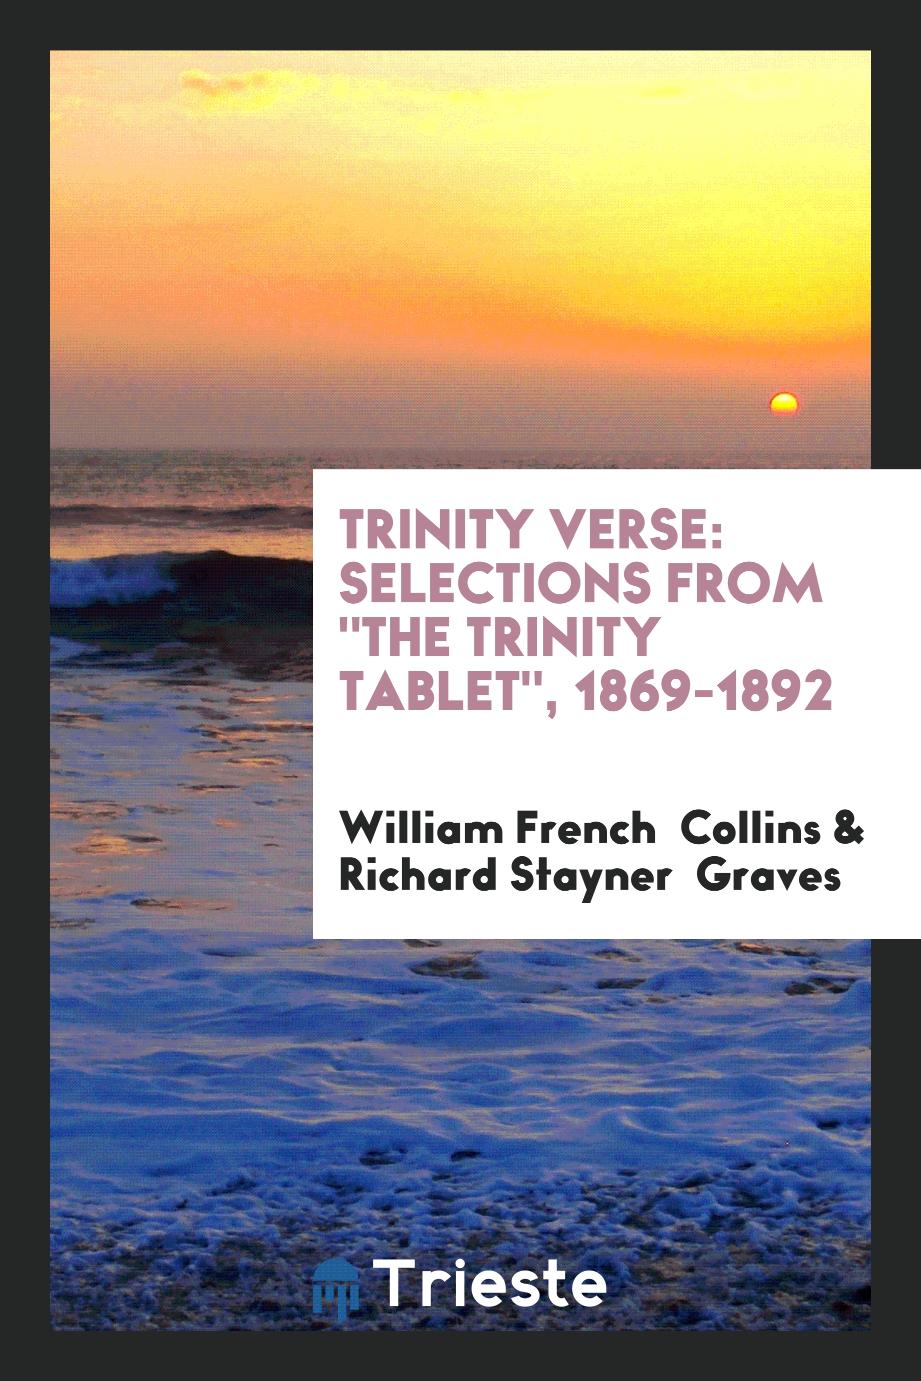 Trinity Verse: Selections from "The Trinity Tablet", 1869-1892